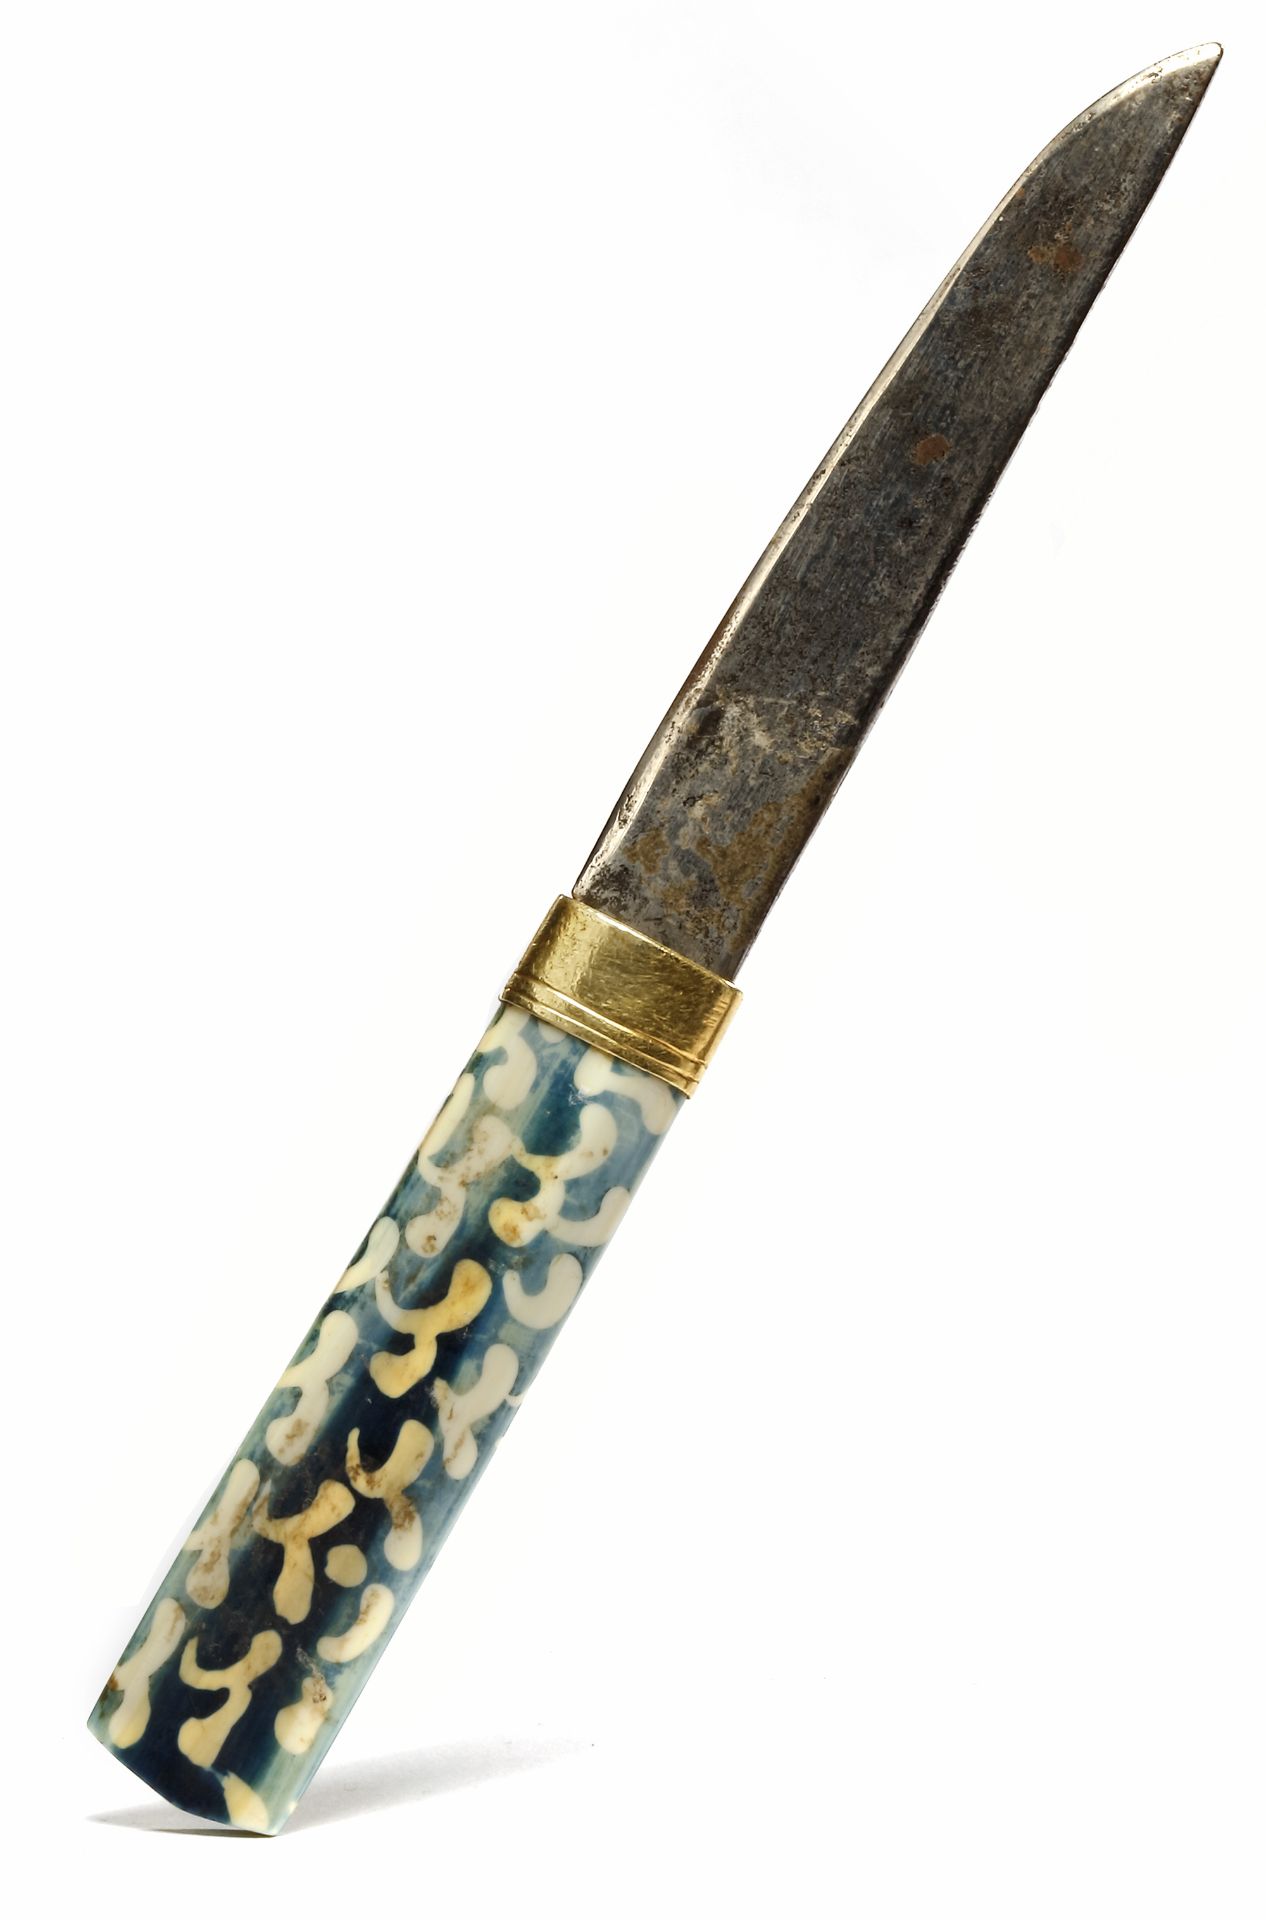 A SMALL INSCRIBED KNIFE, LATE TIMURID, 15TH-16TH CENTURY - Image 3 of 12